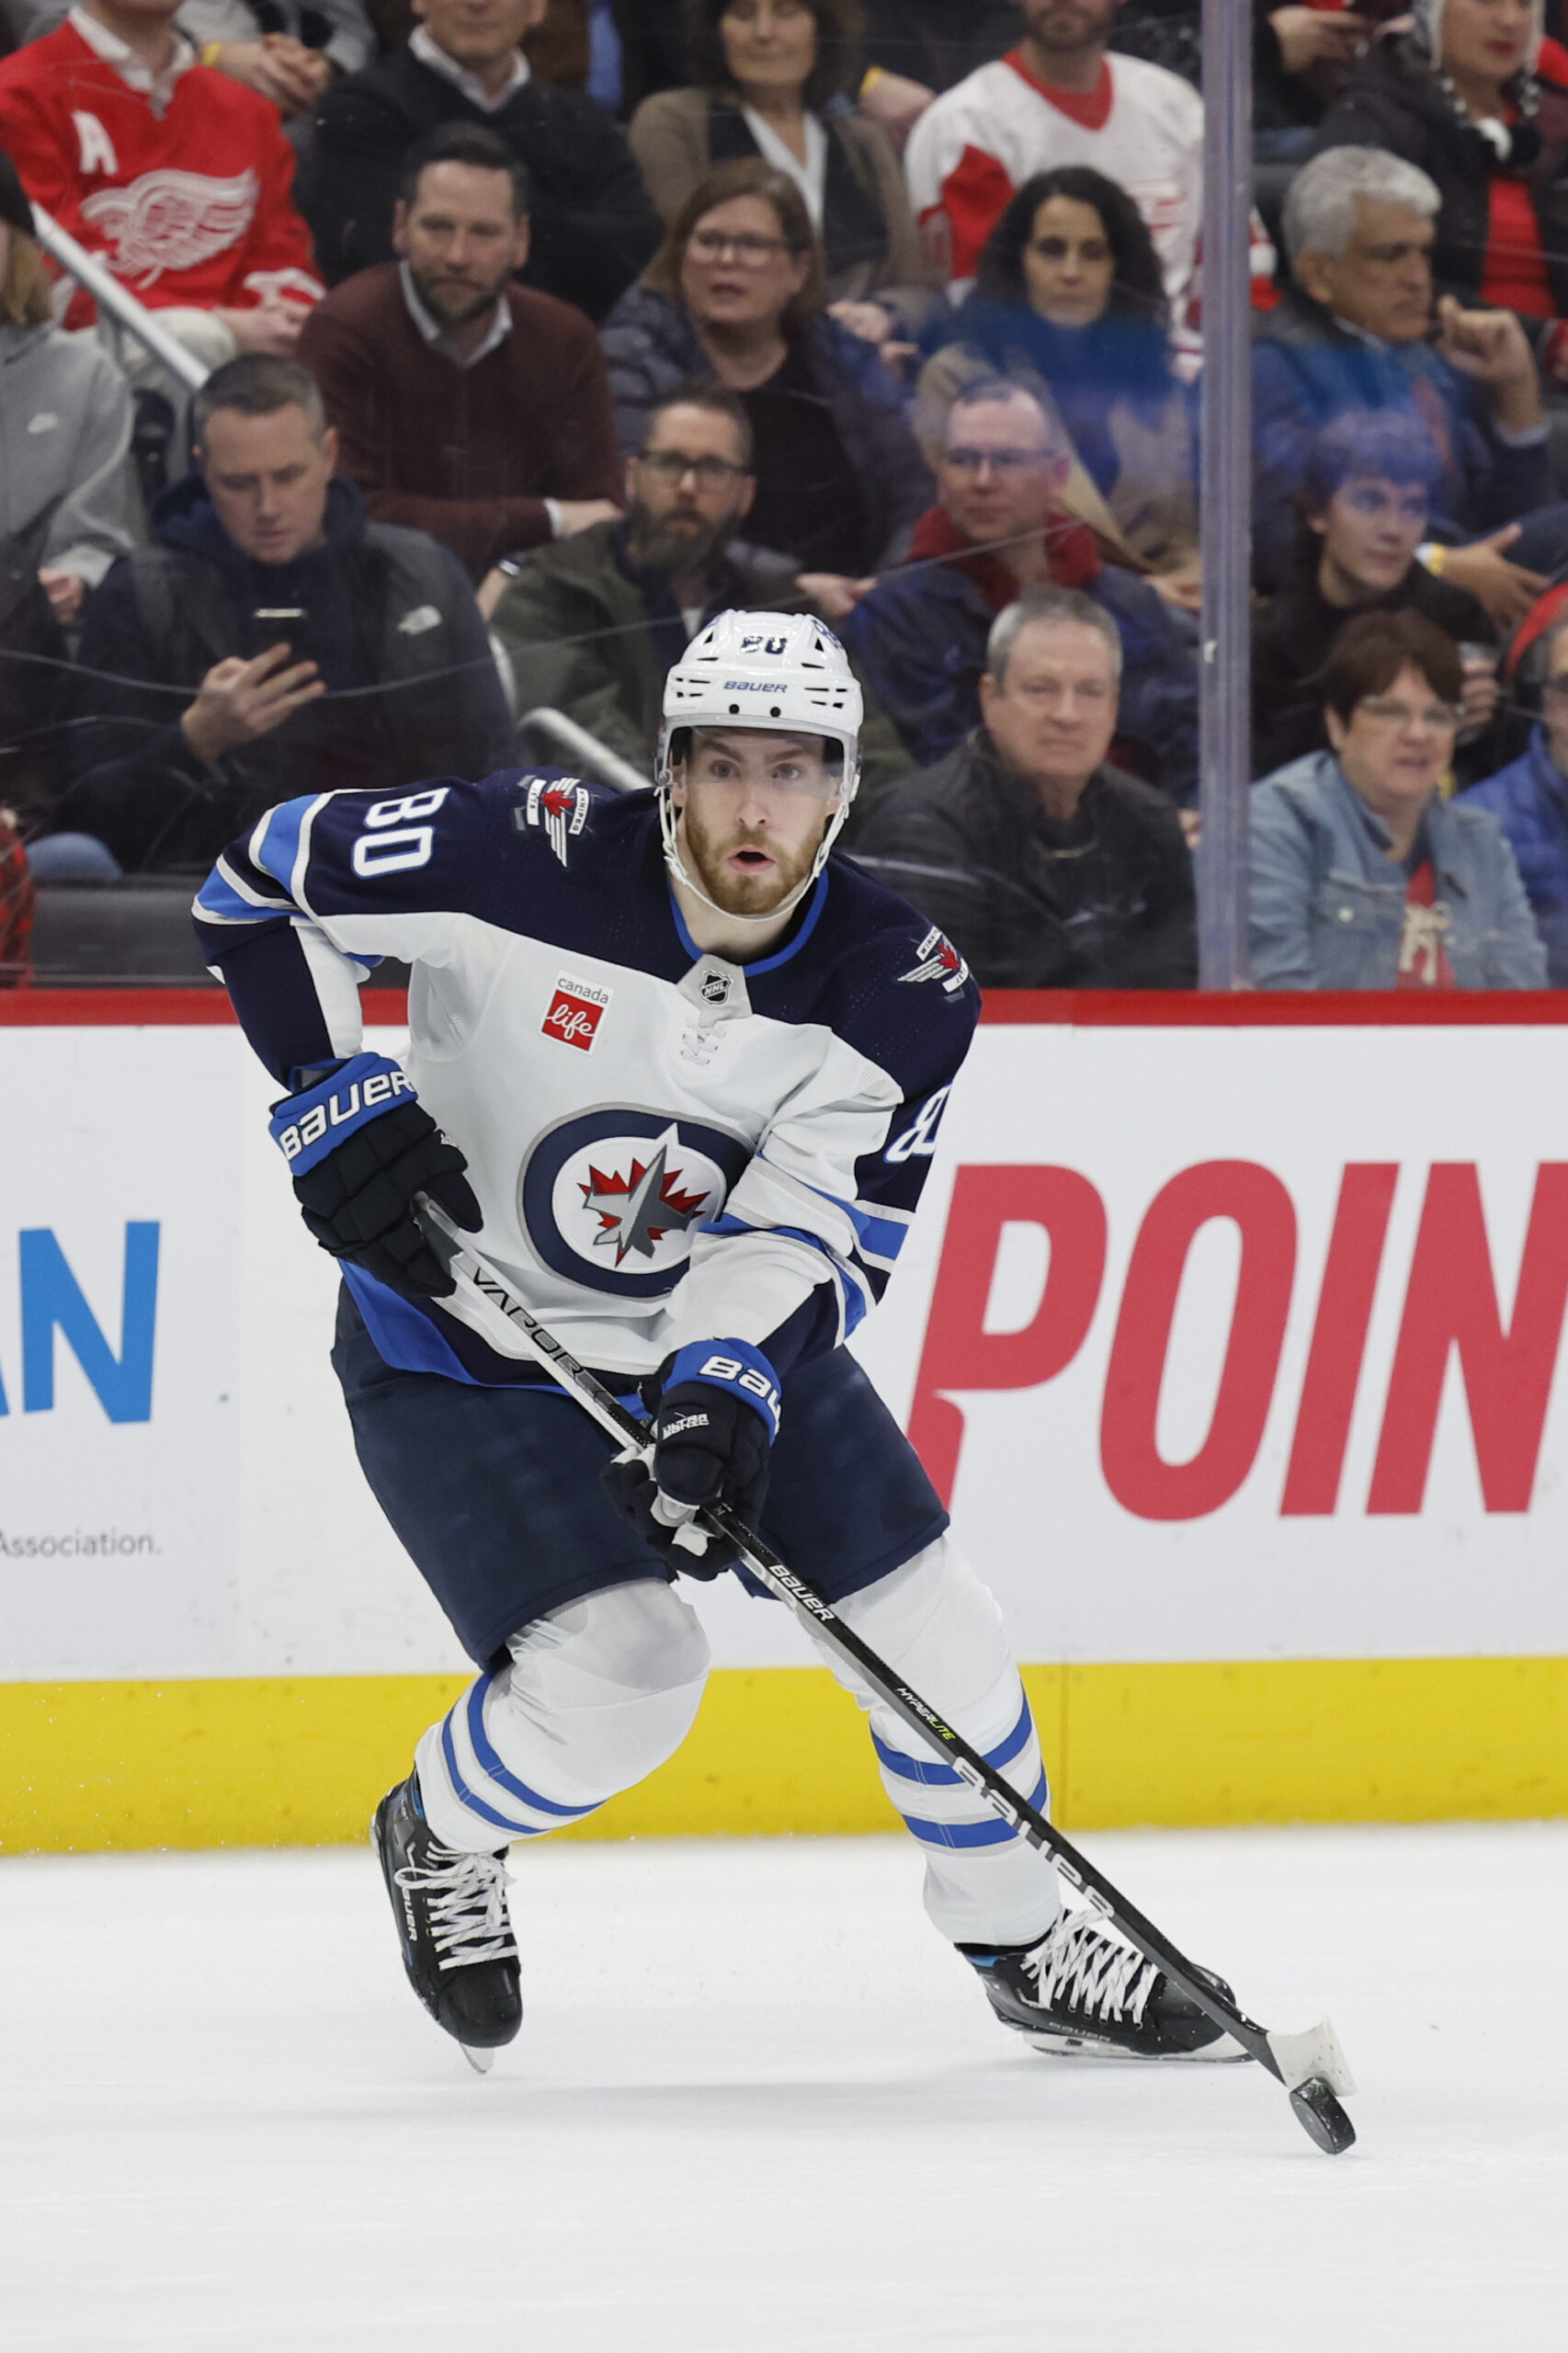 Blue Jackets, Jets pull off major trade involving Pierre-Luc